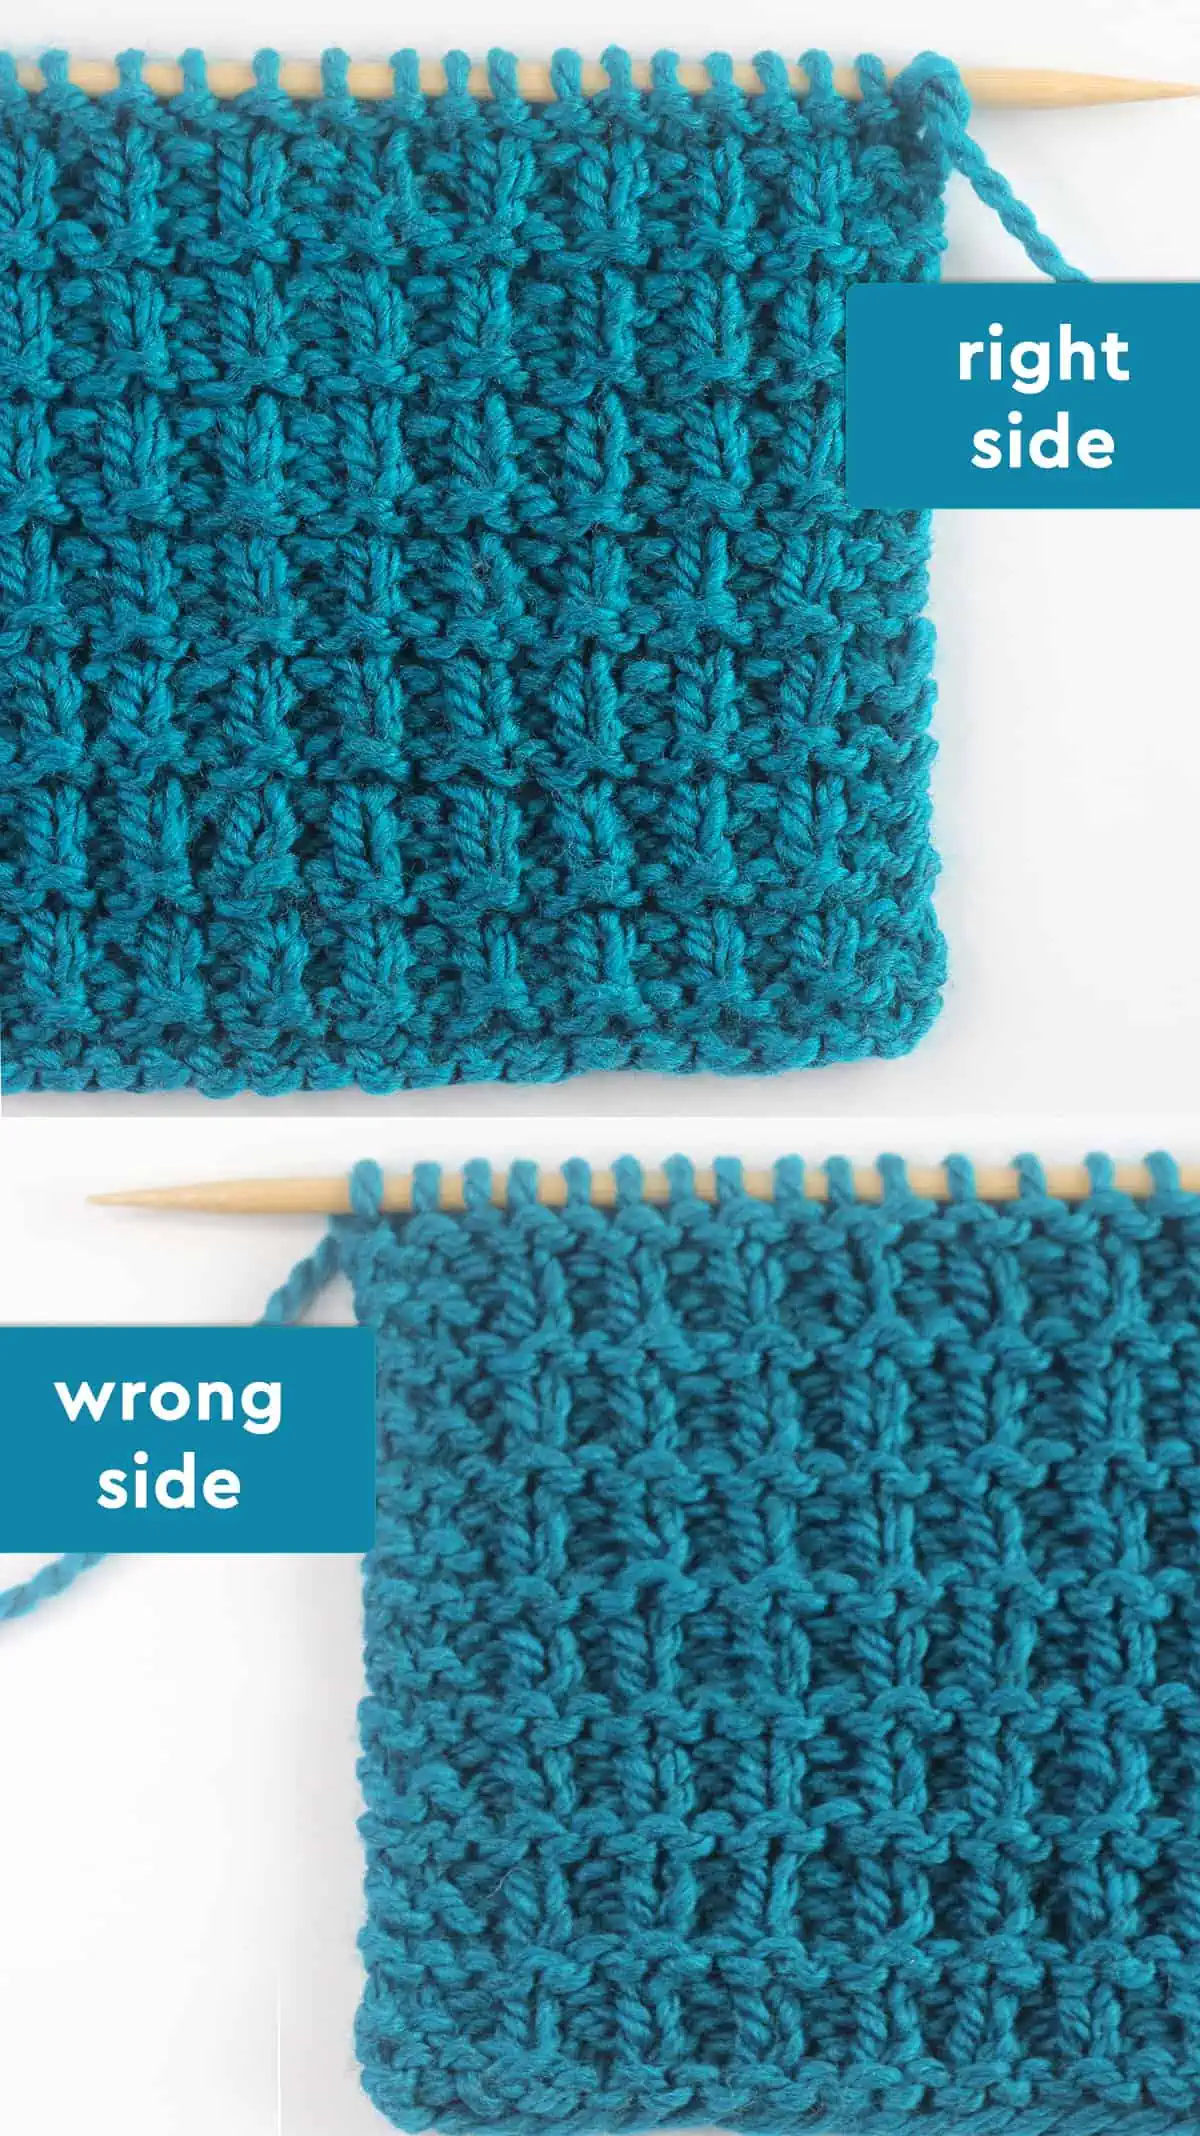 Right and wrong sides of the Hurdle stitch texture knitted with blue colored yarn.